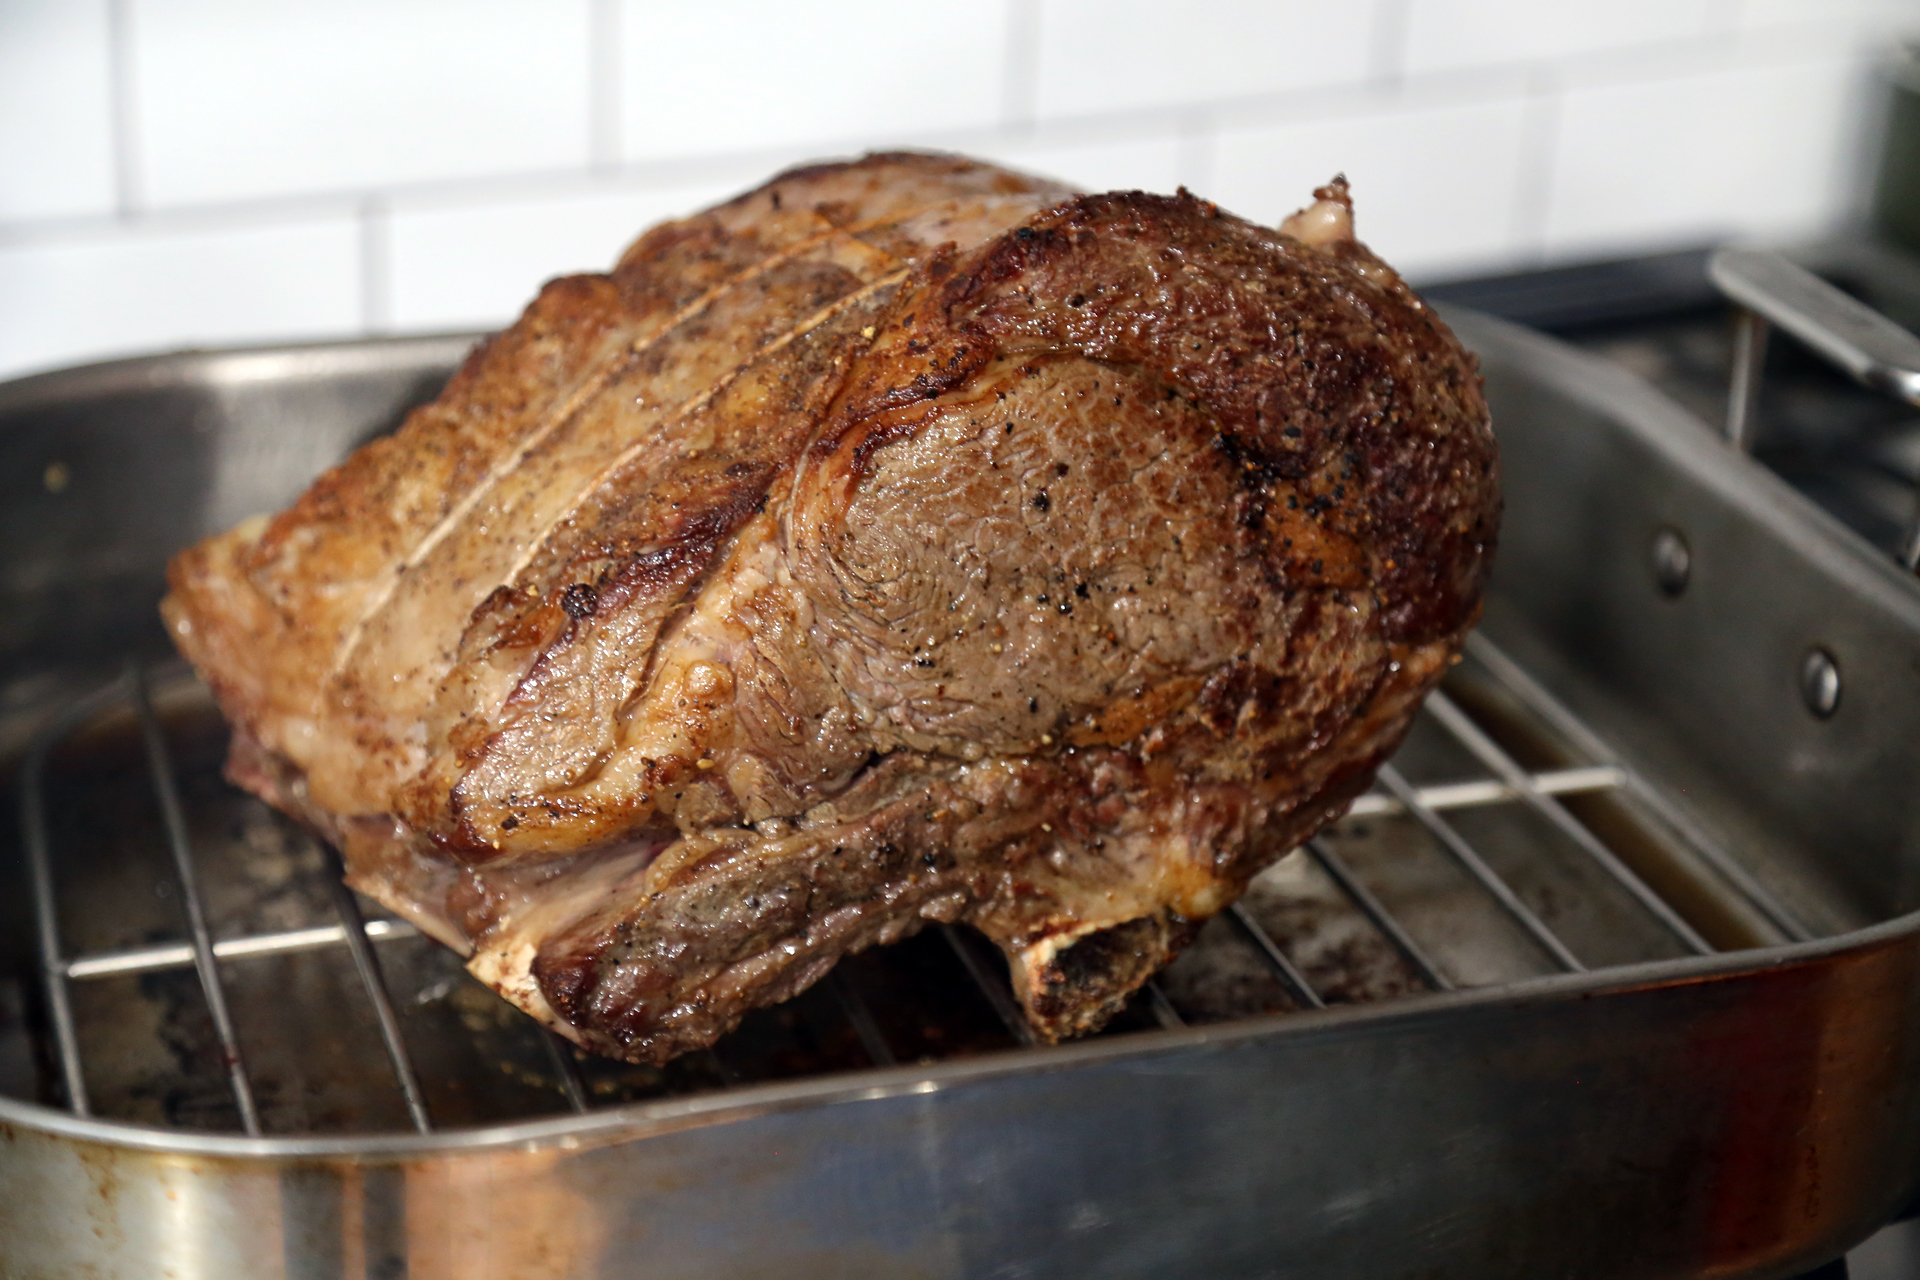 Pull out the roast, add a roasting rack and place the roast bone-side-down on the roasting rack. Transfer to the oven.